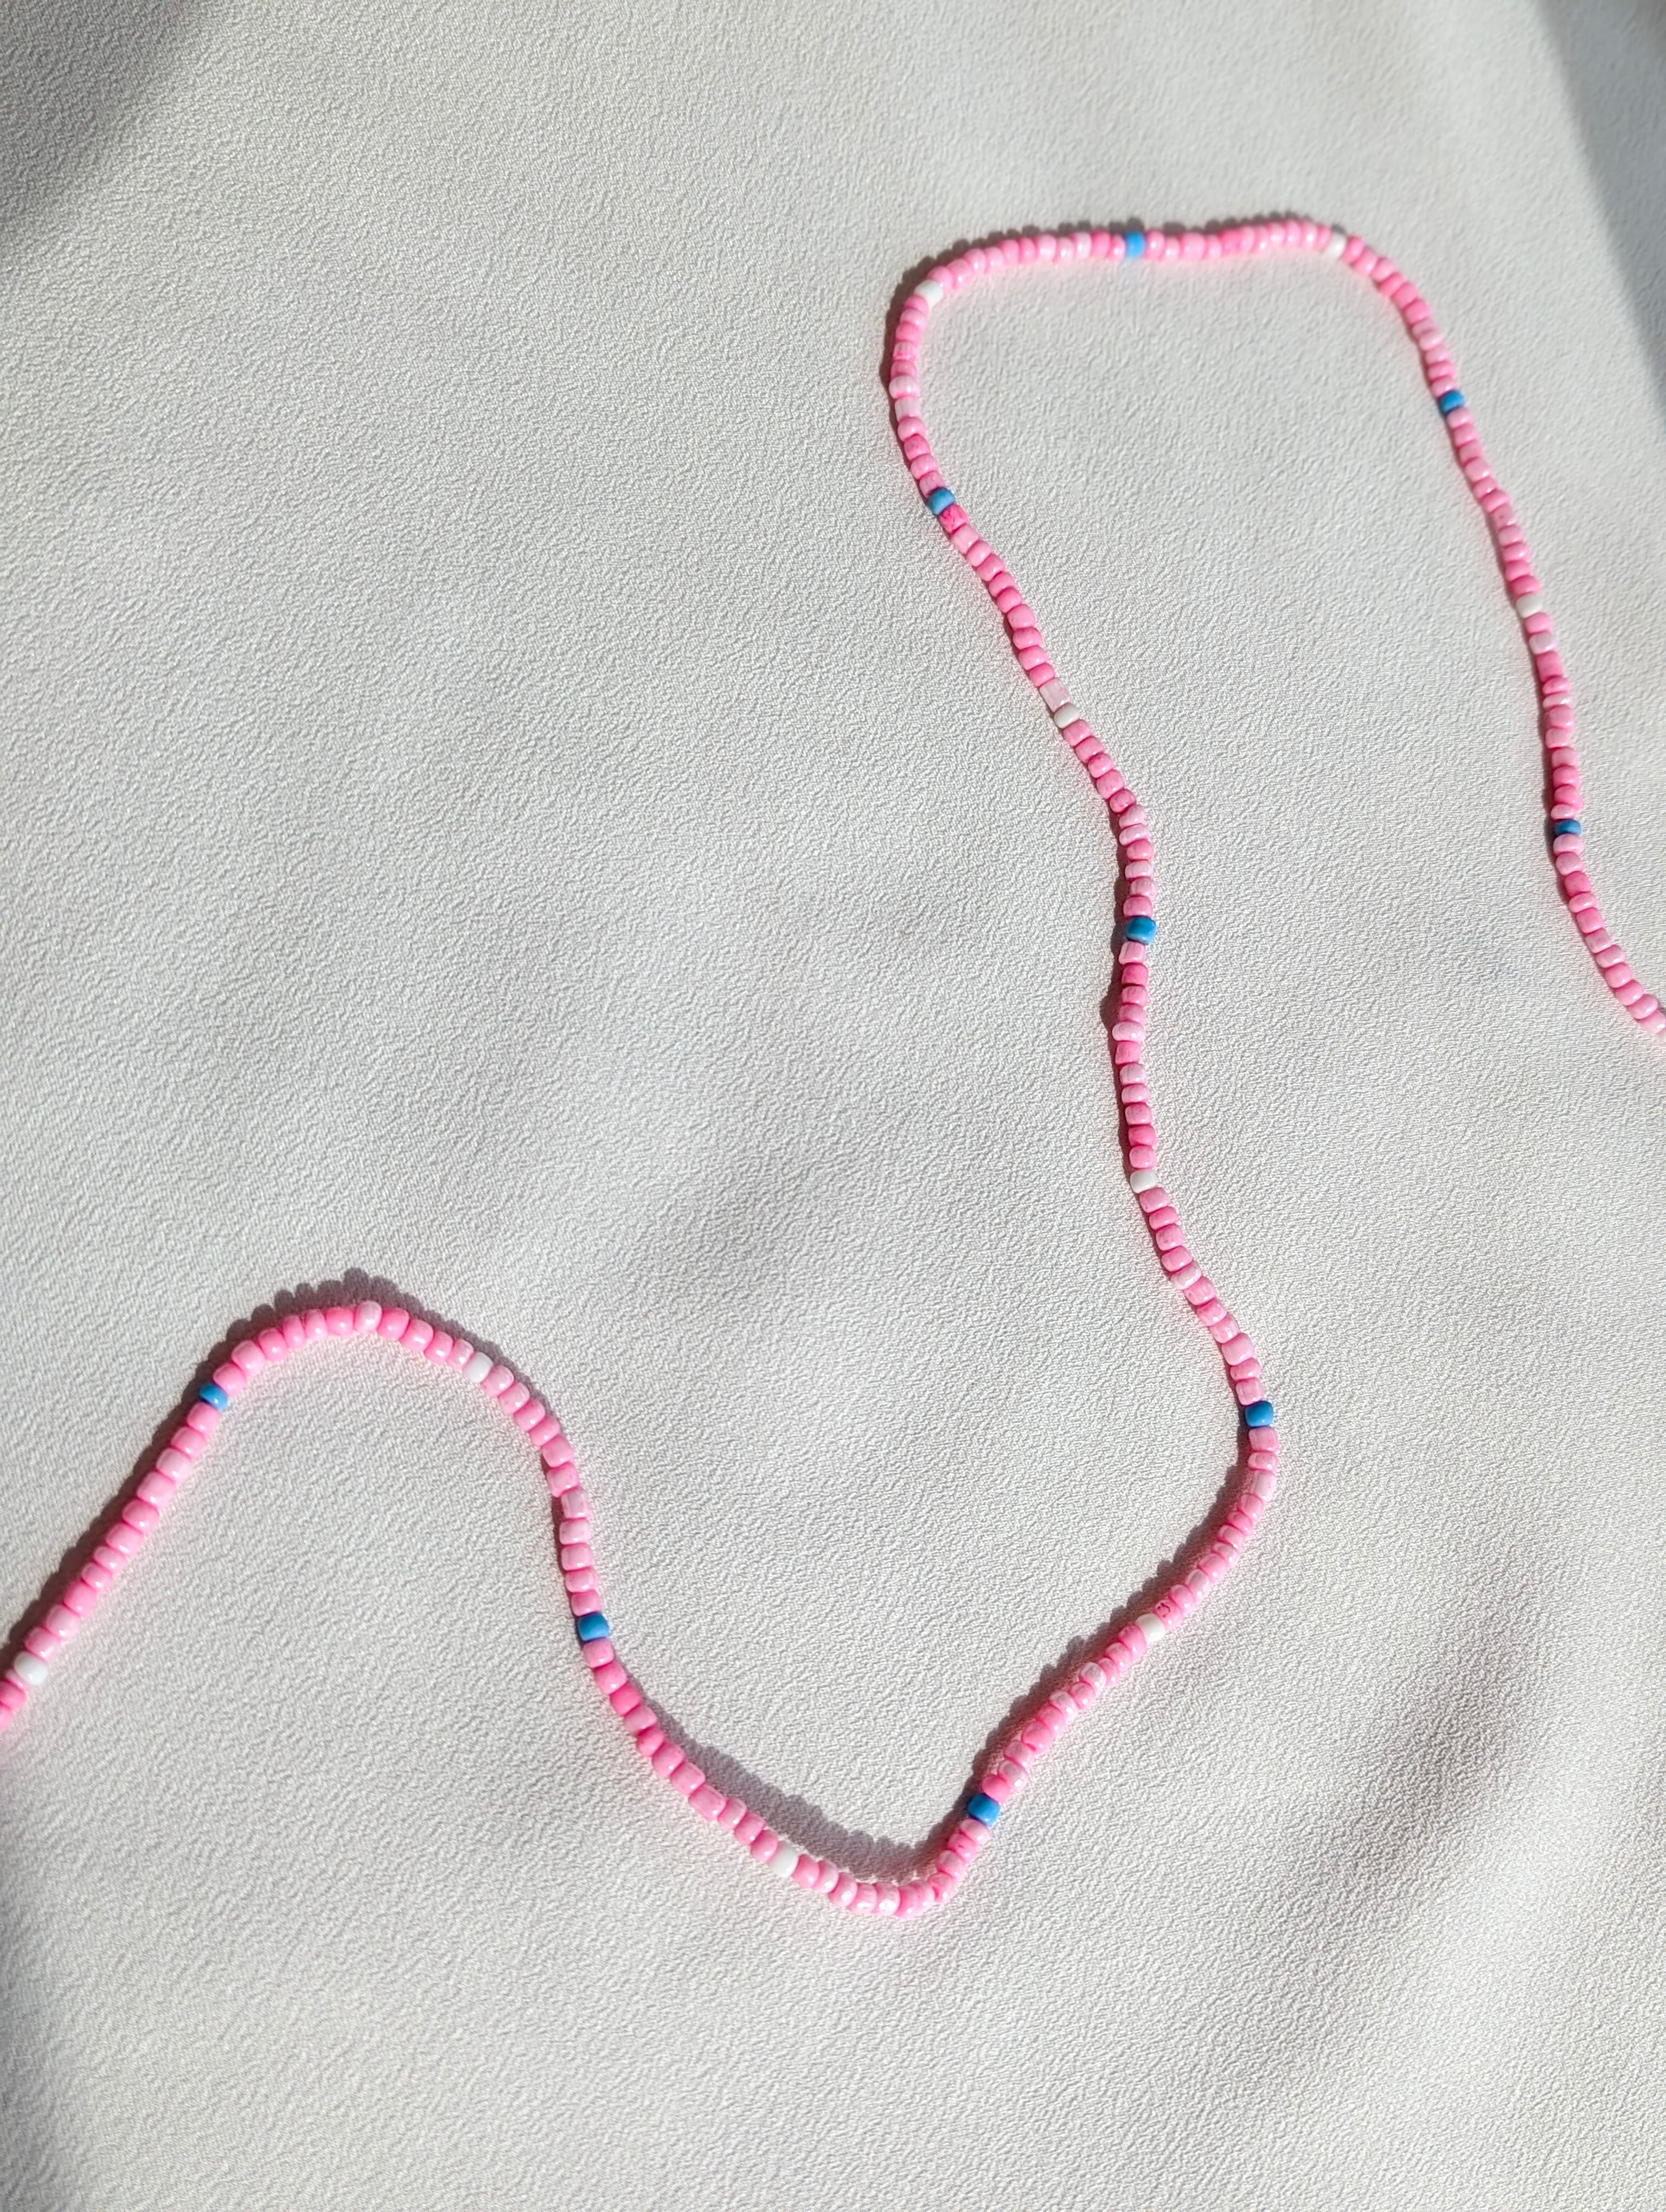 [THE ELEVEN] Belly Chain: Pink/Blue + White [Large Beads]